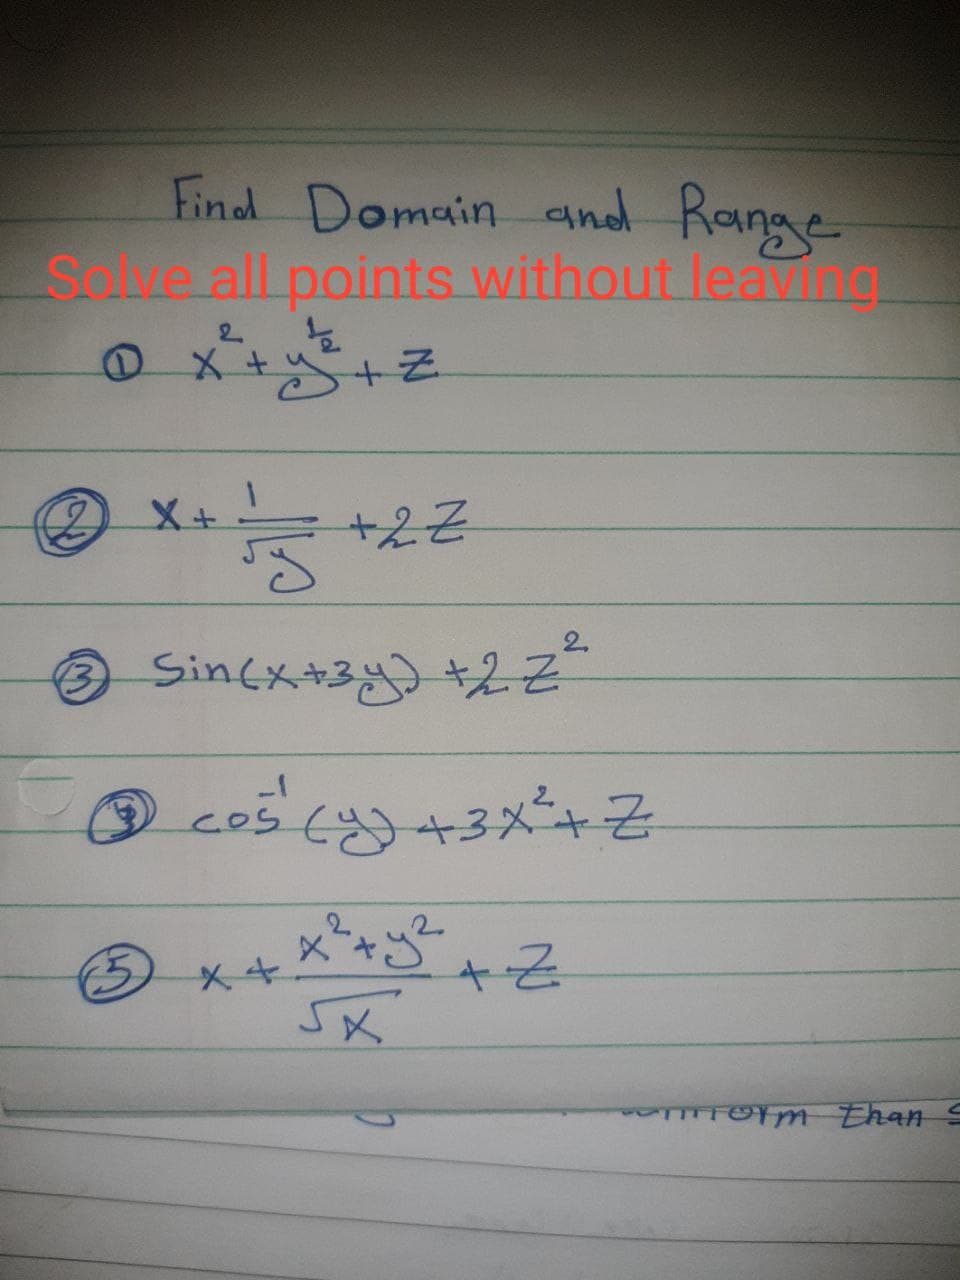 Find Domain and Range
Sove all points without leaving
12
℗ x + y² + Z
2
X-
*+/-5
+2Z
3 Sin(x+3y) +2 Z²²
@ cos' (x) + 3x² + Z
5
x ² + y² + Z
SX
CONFORM than s